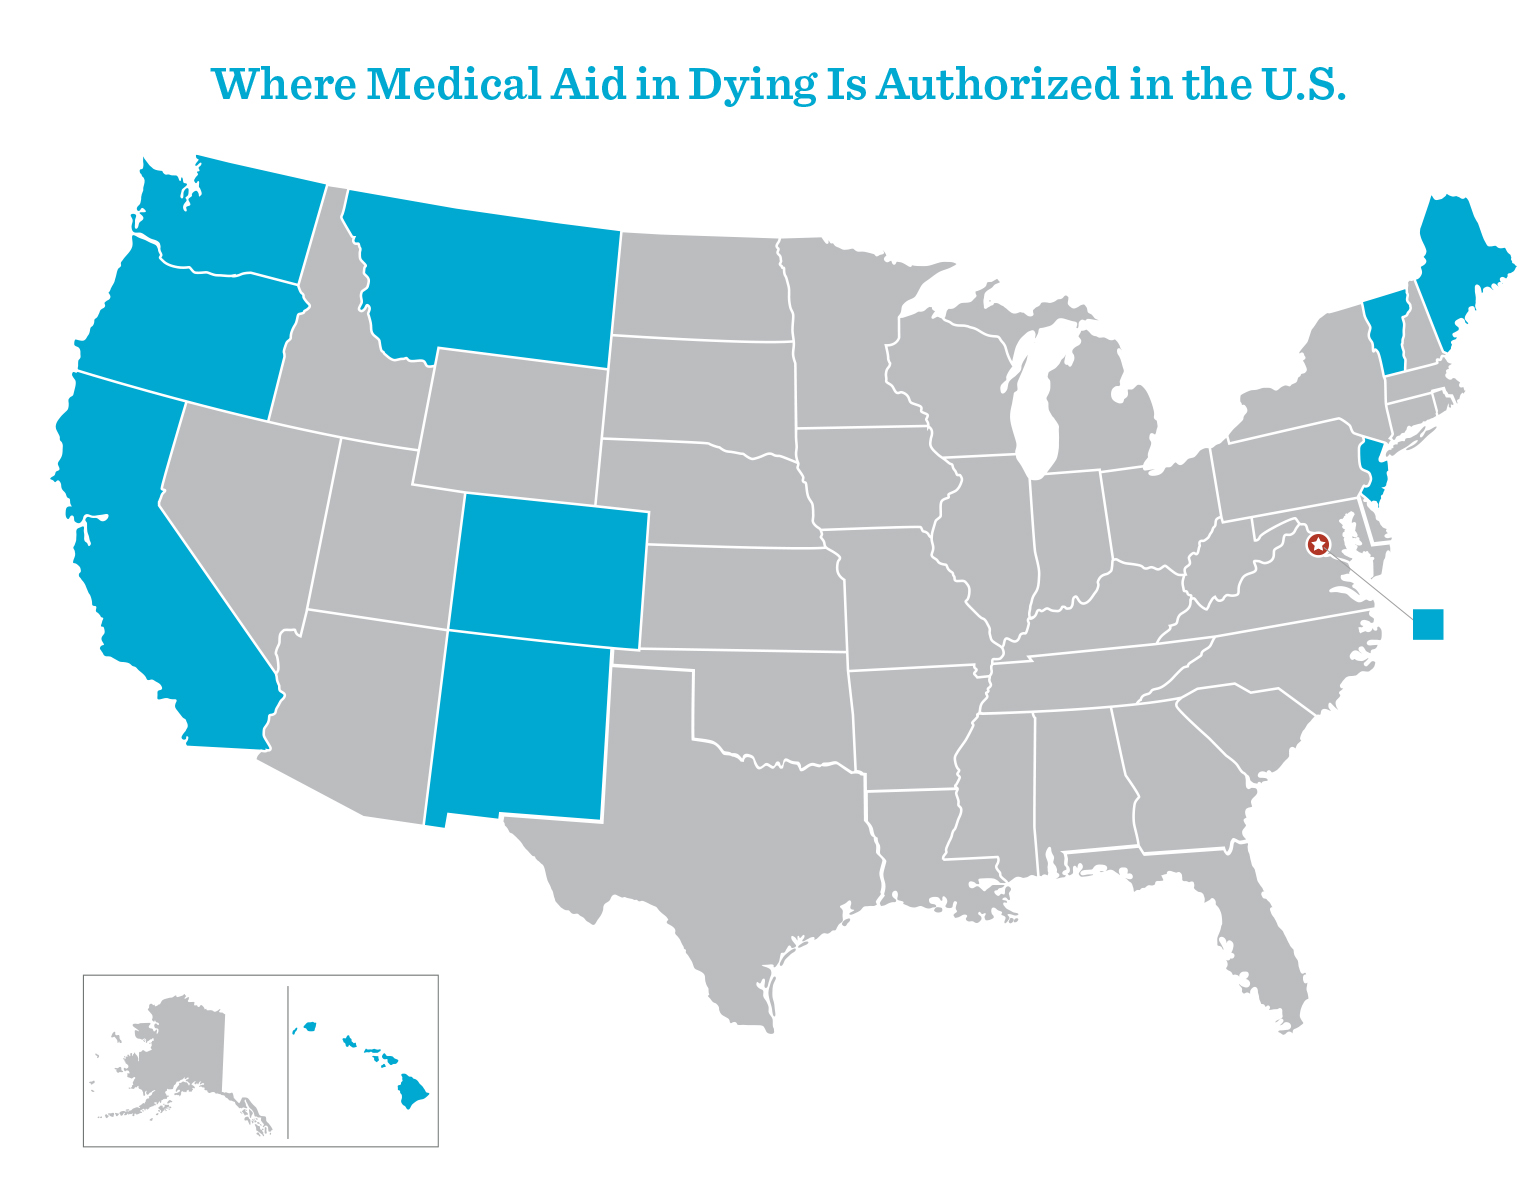 Map of the states and territories where Medical Aid in Dying is Authorized